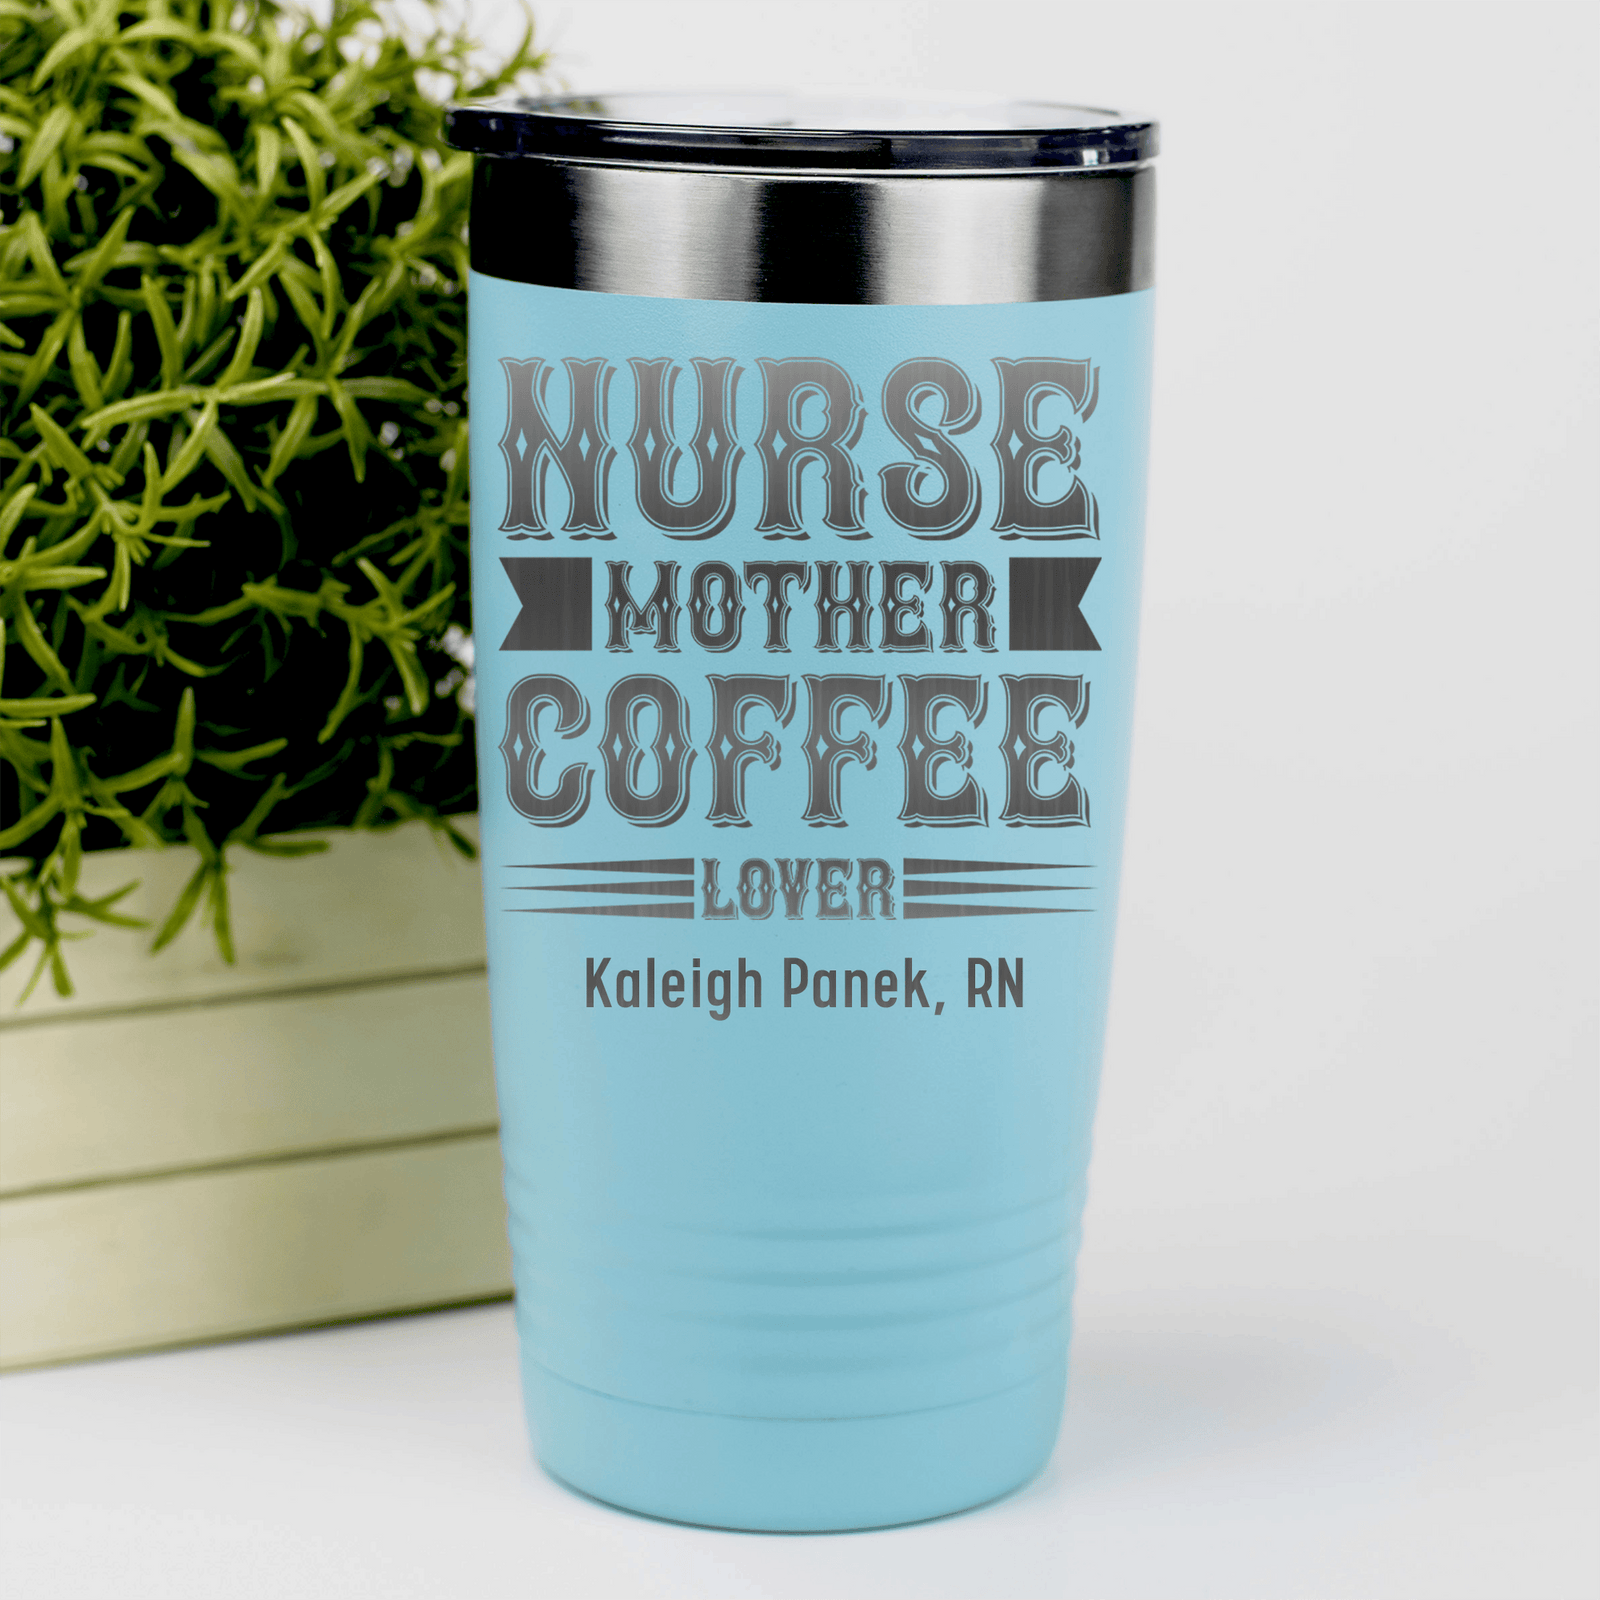 Teal Nurse Tumbler With Nurse Mother And Coffee Design